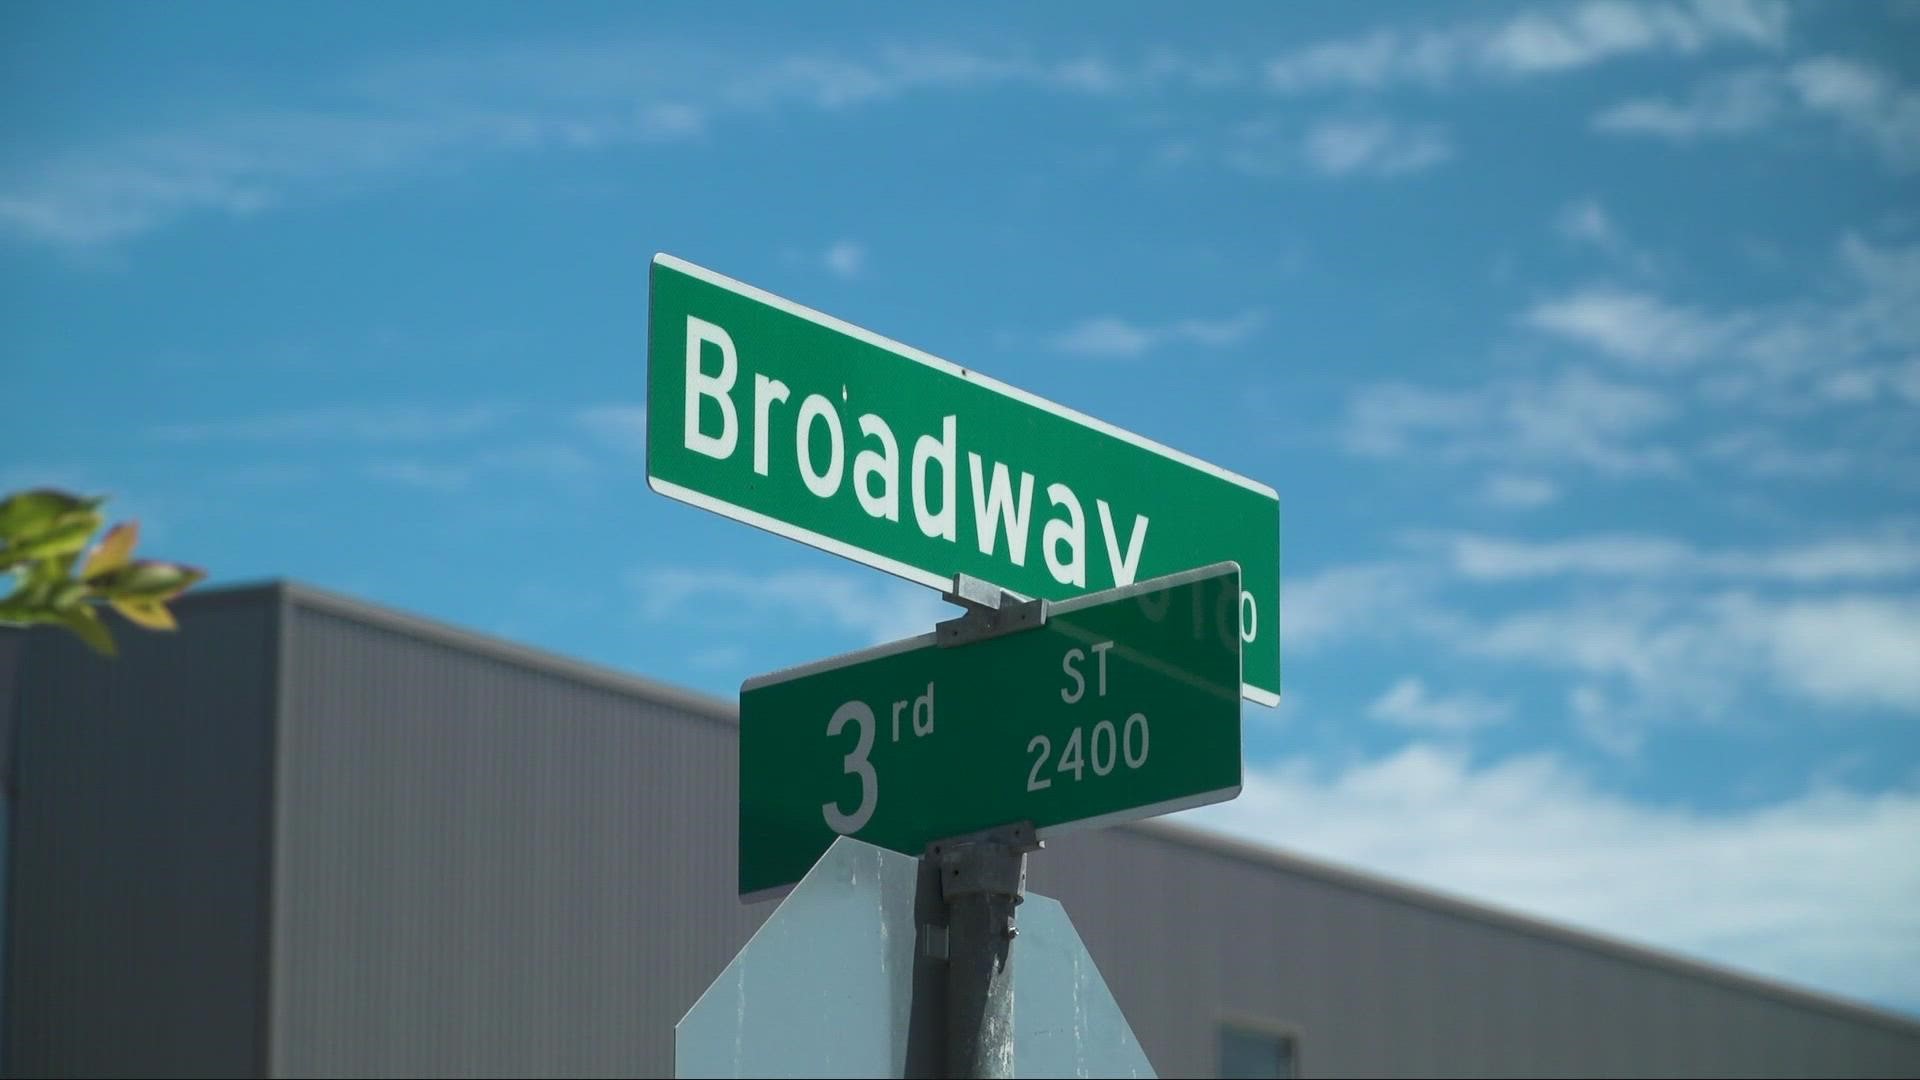 For more than a decade, the city of Sacramento has been working on how to revitalize Broadway.